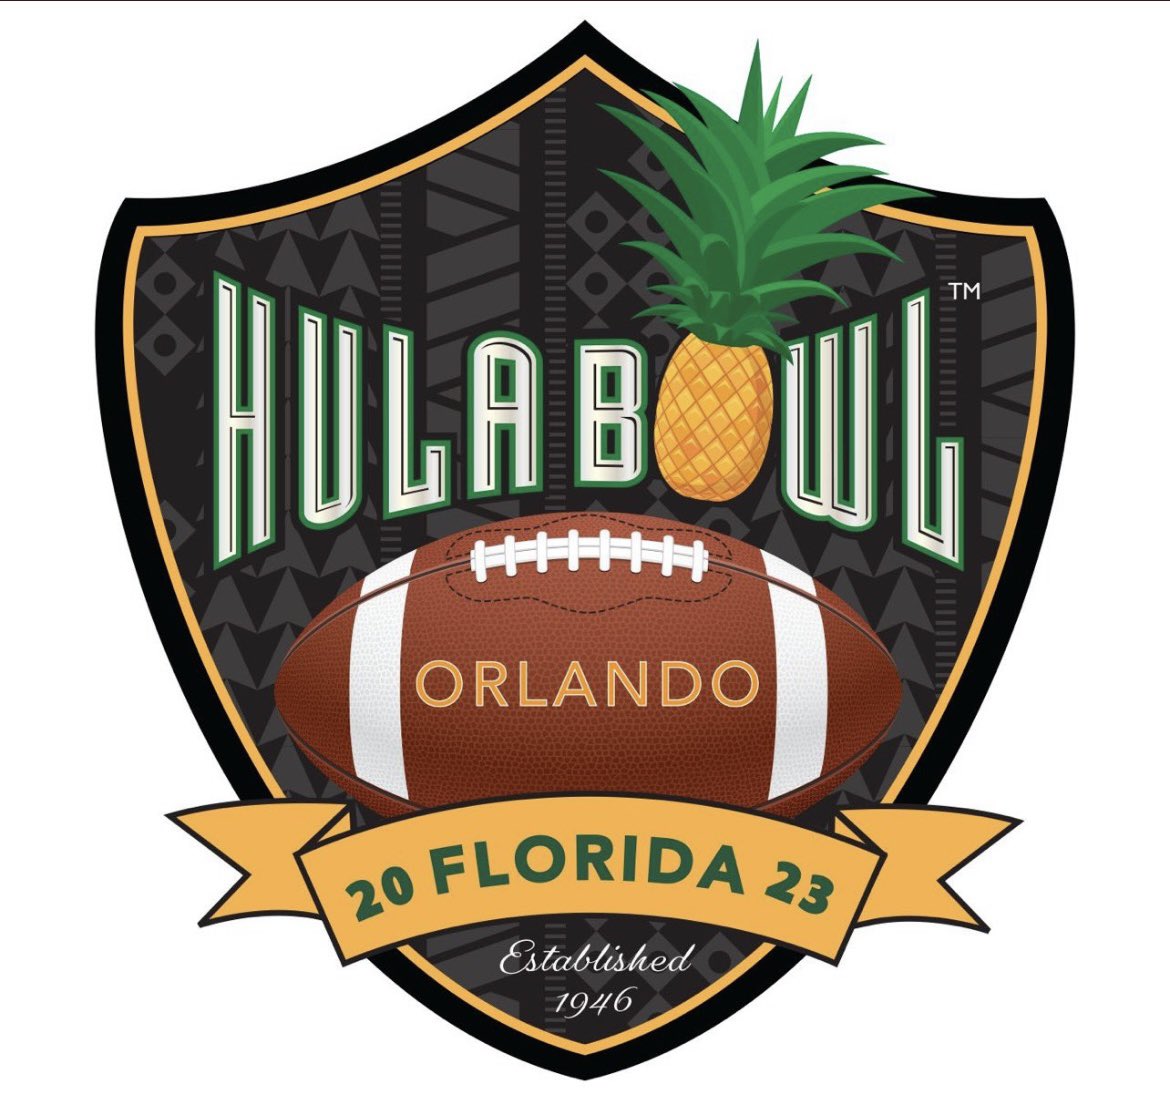 See you soon crew. Ready to rock. #HulaBowl